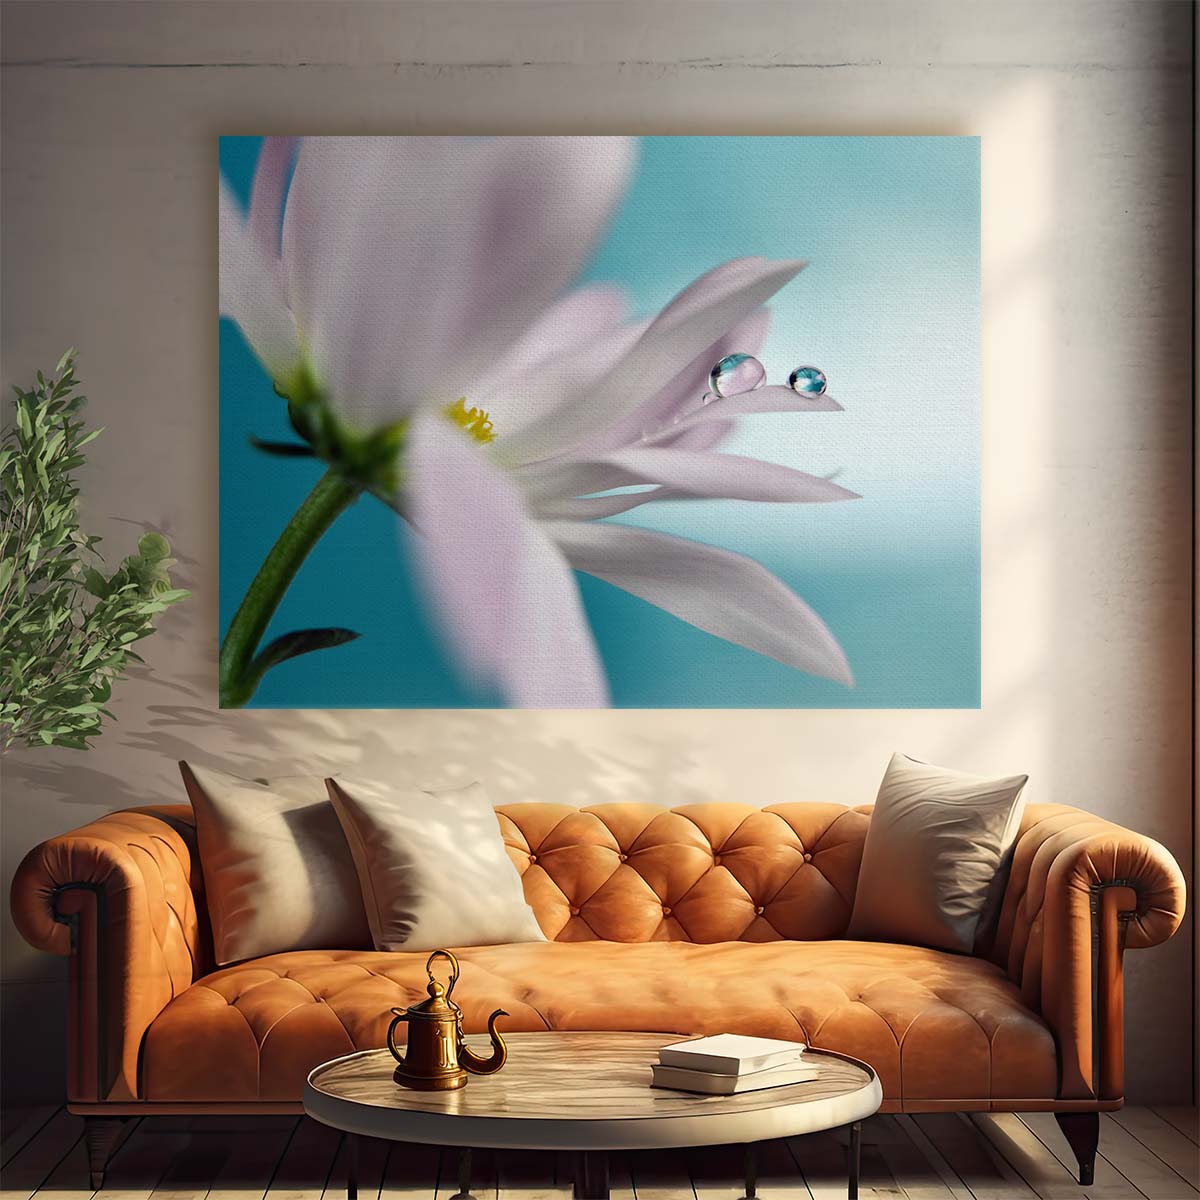 Turquoise Pearl Droplets on Tender Pink Daisy Wall Art by Luxuriance Designs. Made in USA.